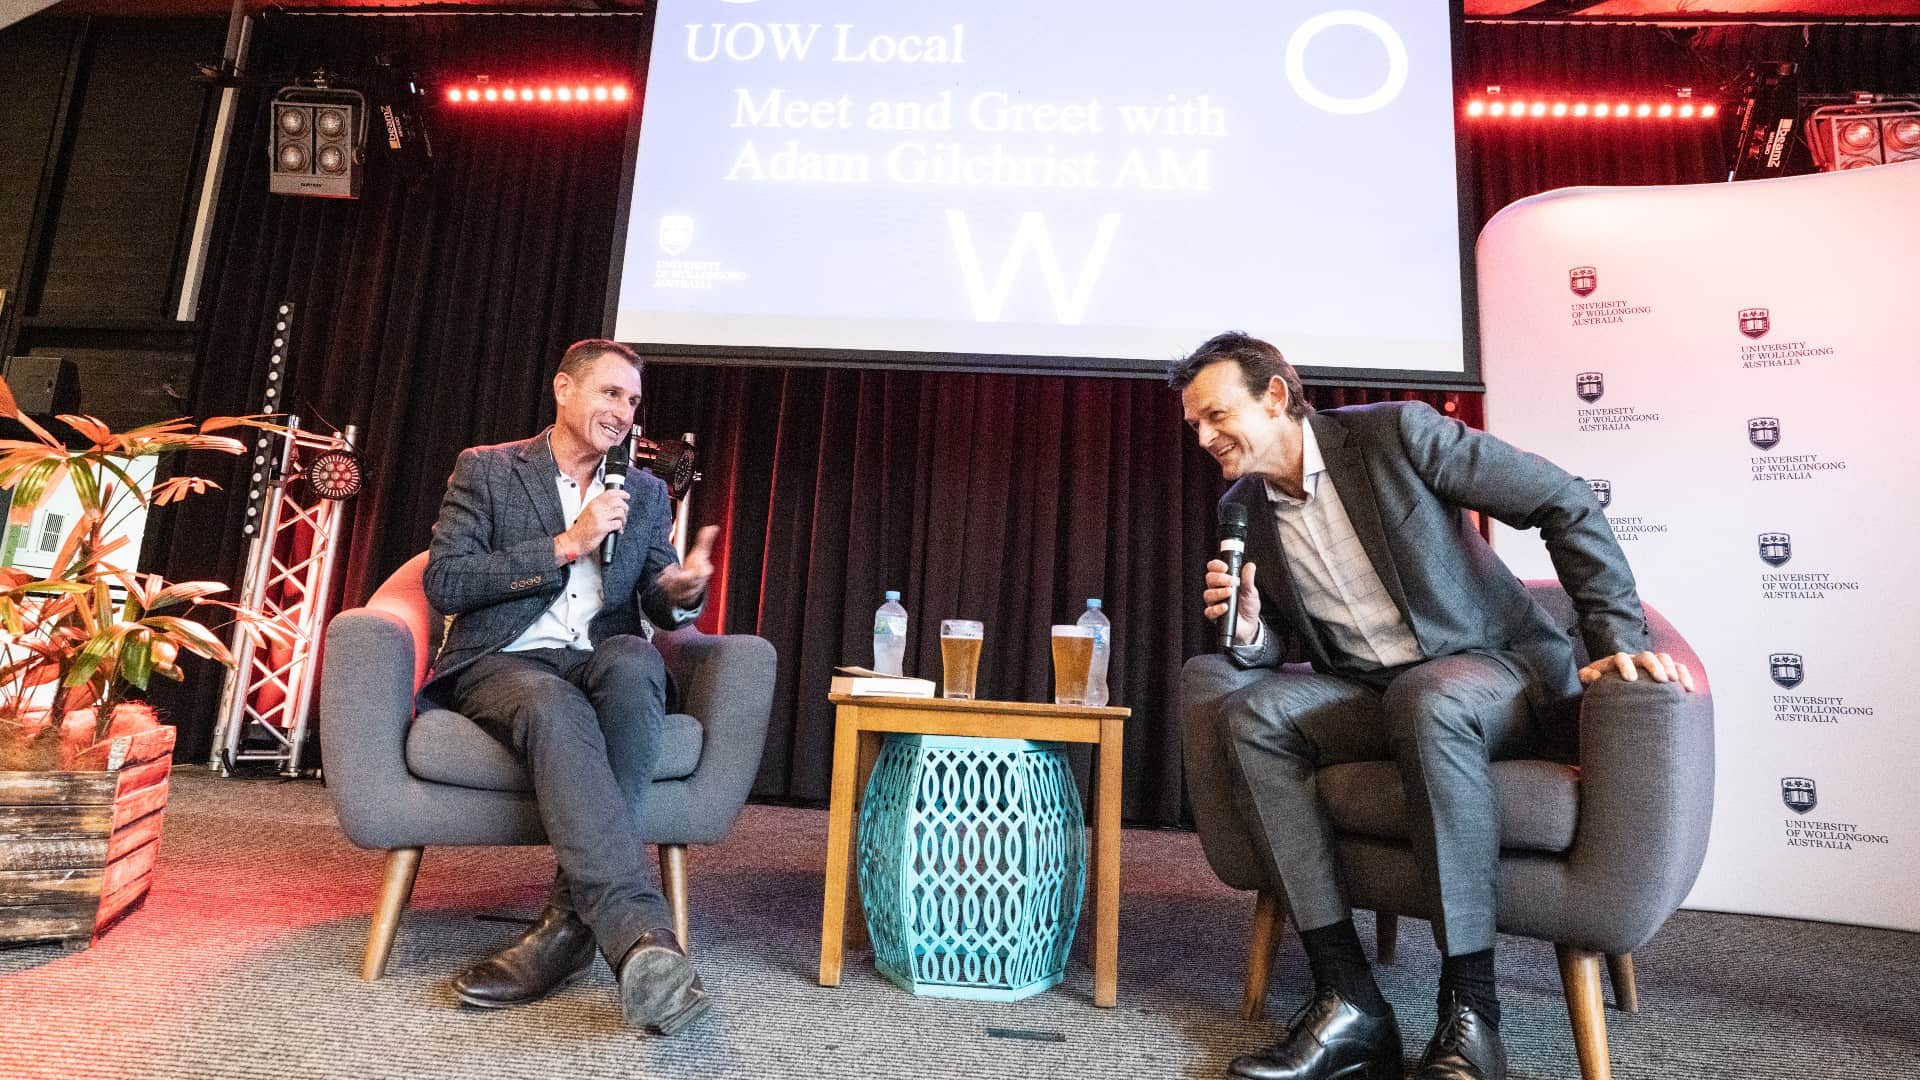 Adam Gilchrist helps launch UOW Local with Q+A for region’s sporting community